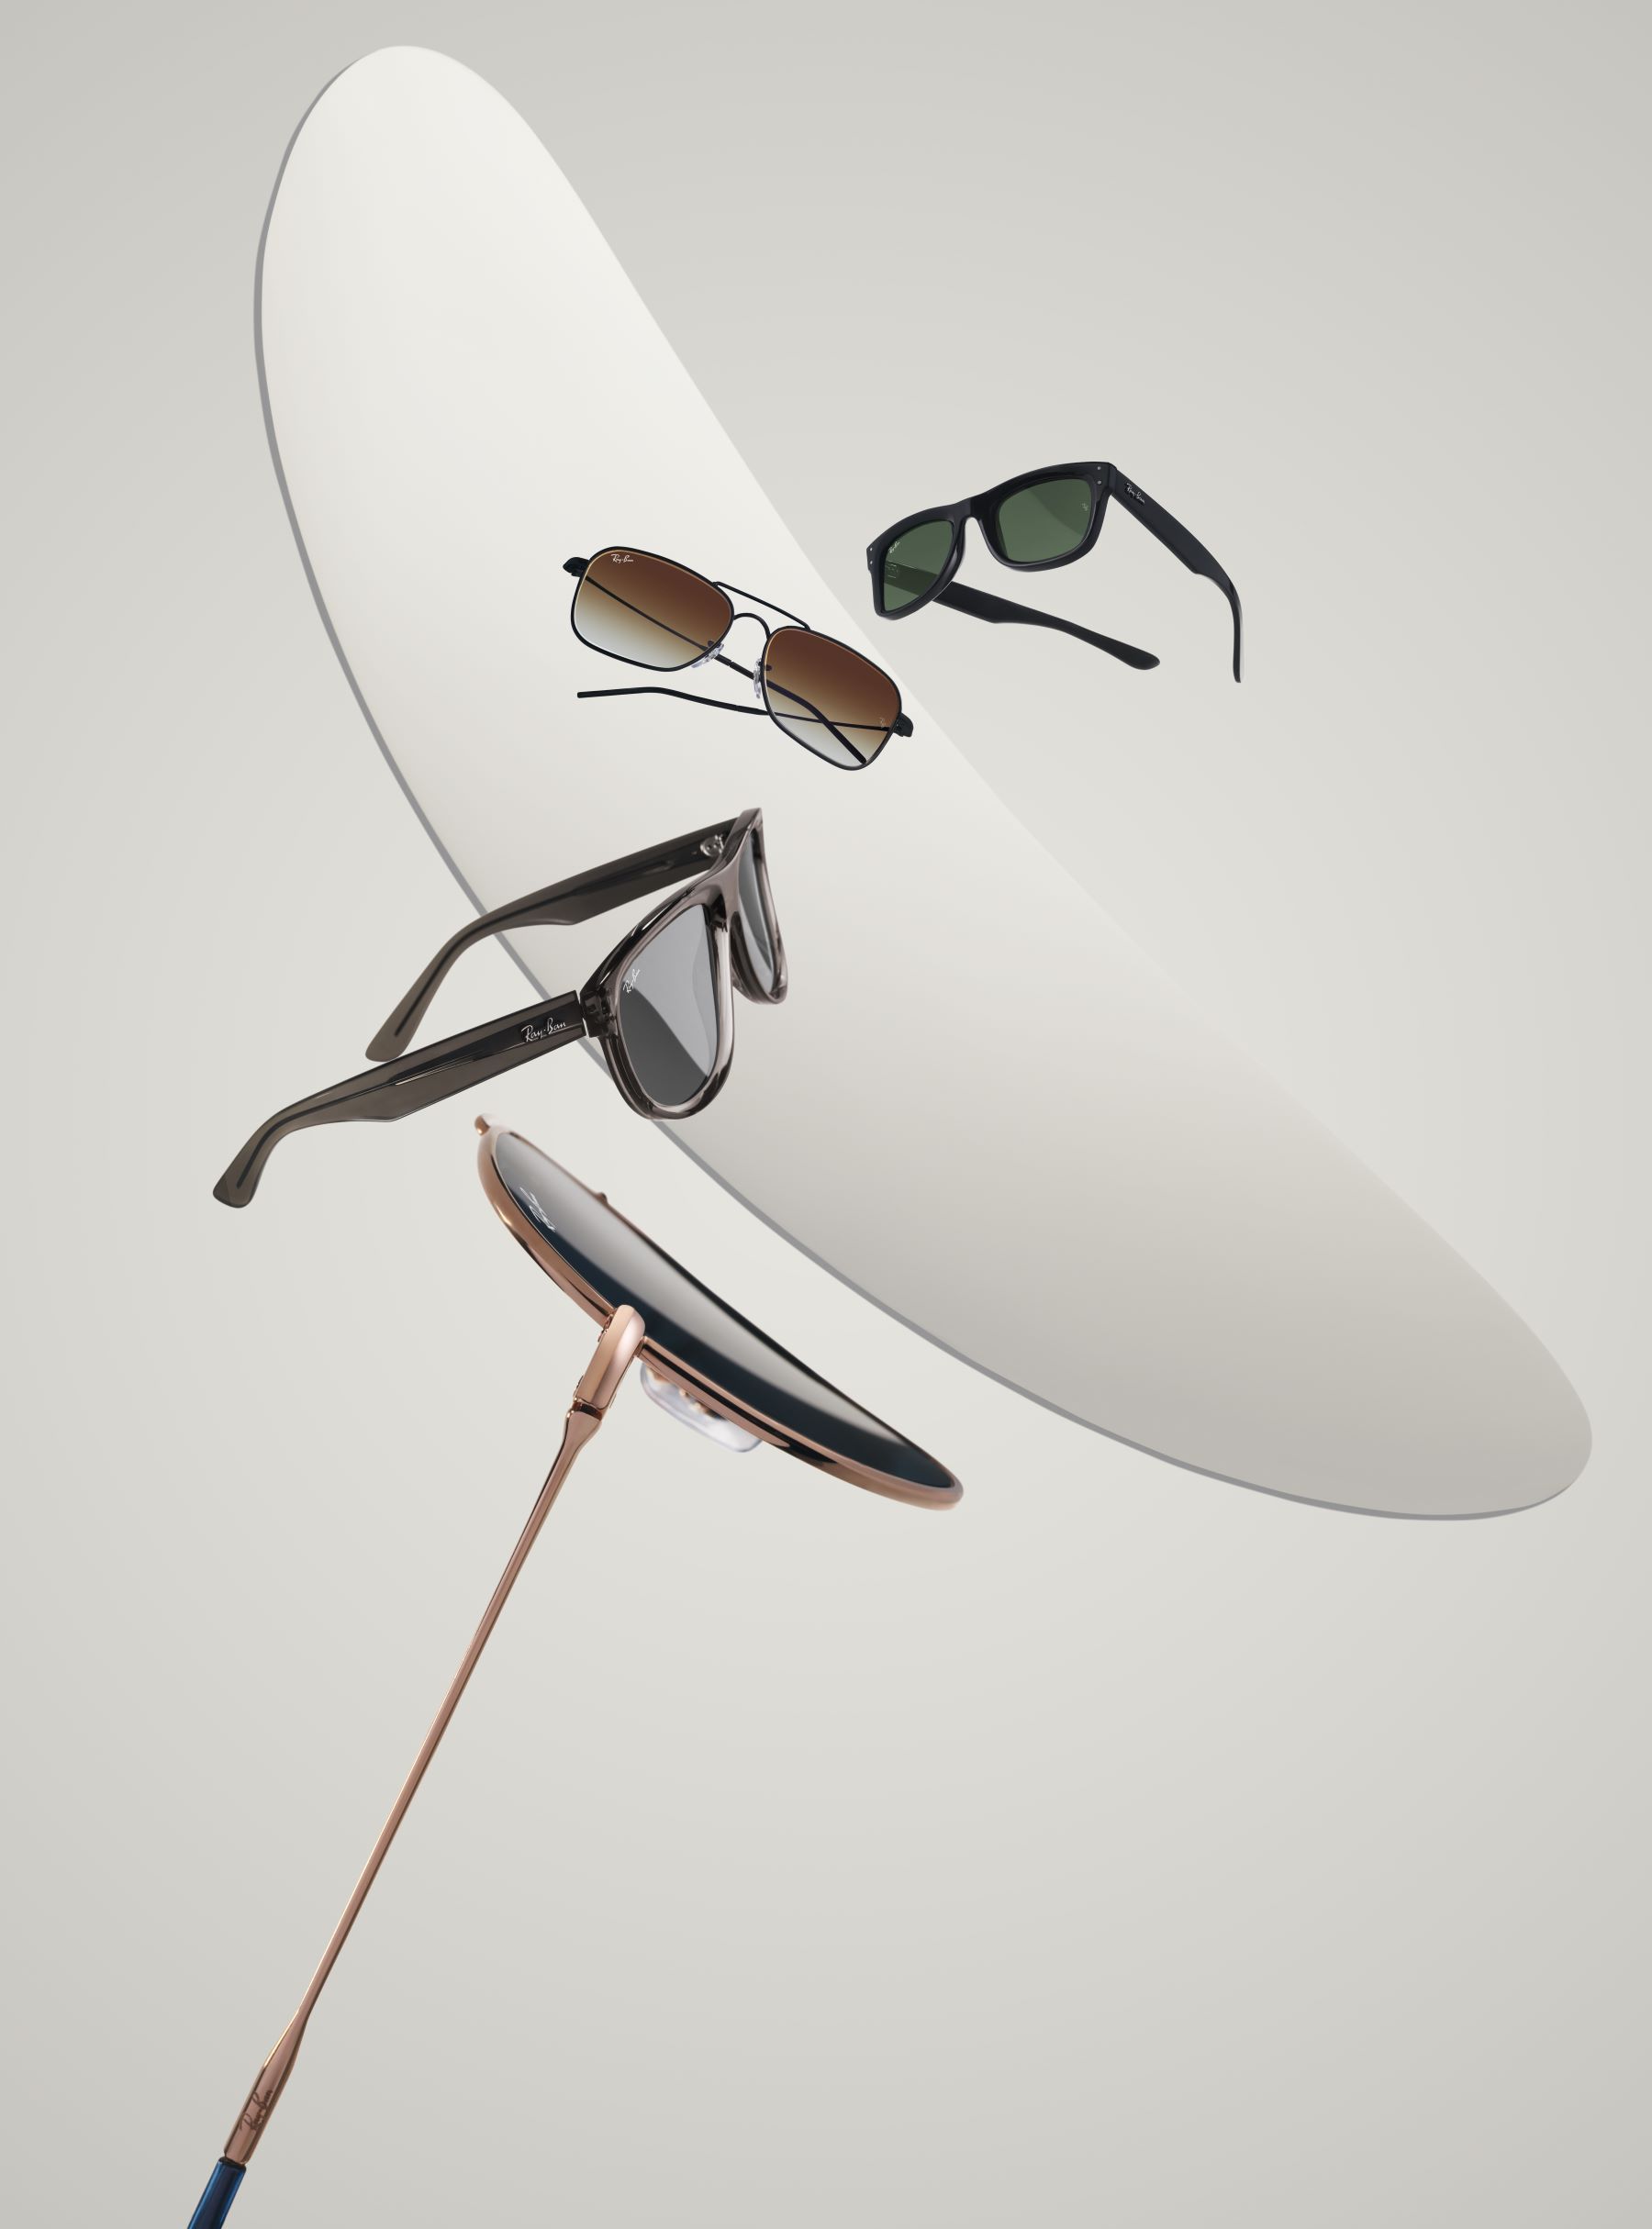 The Ray Ban collection shows its high functionality and style